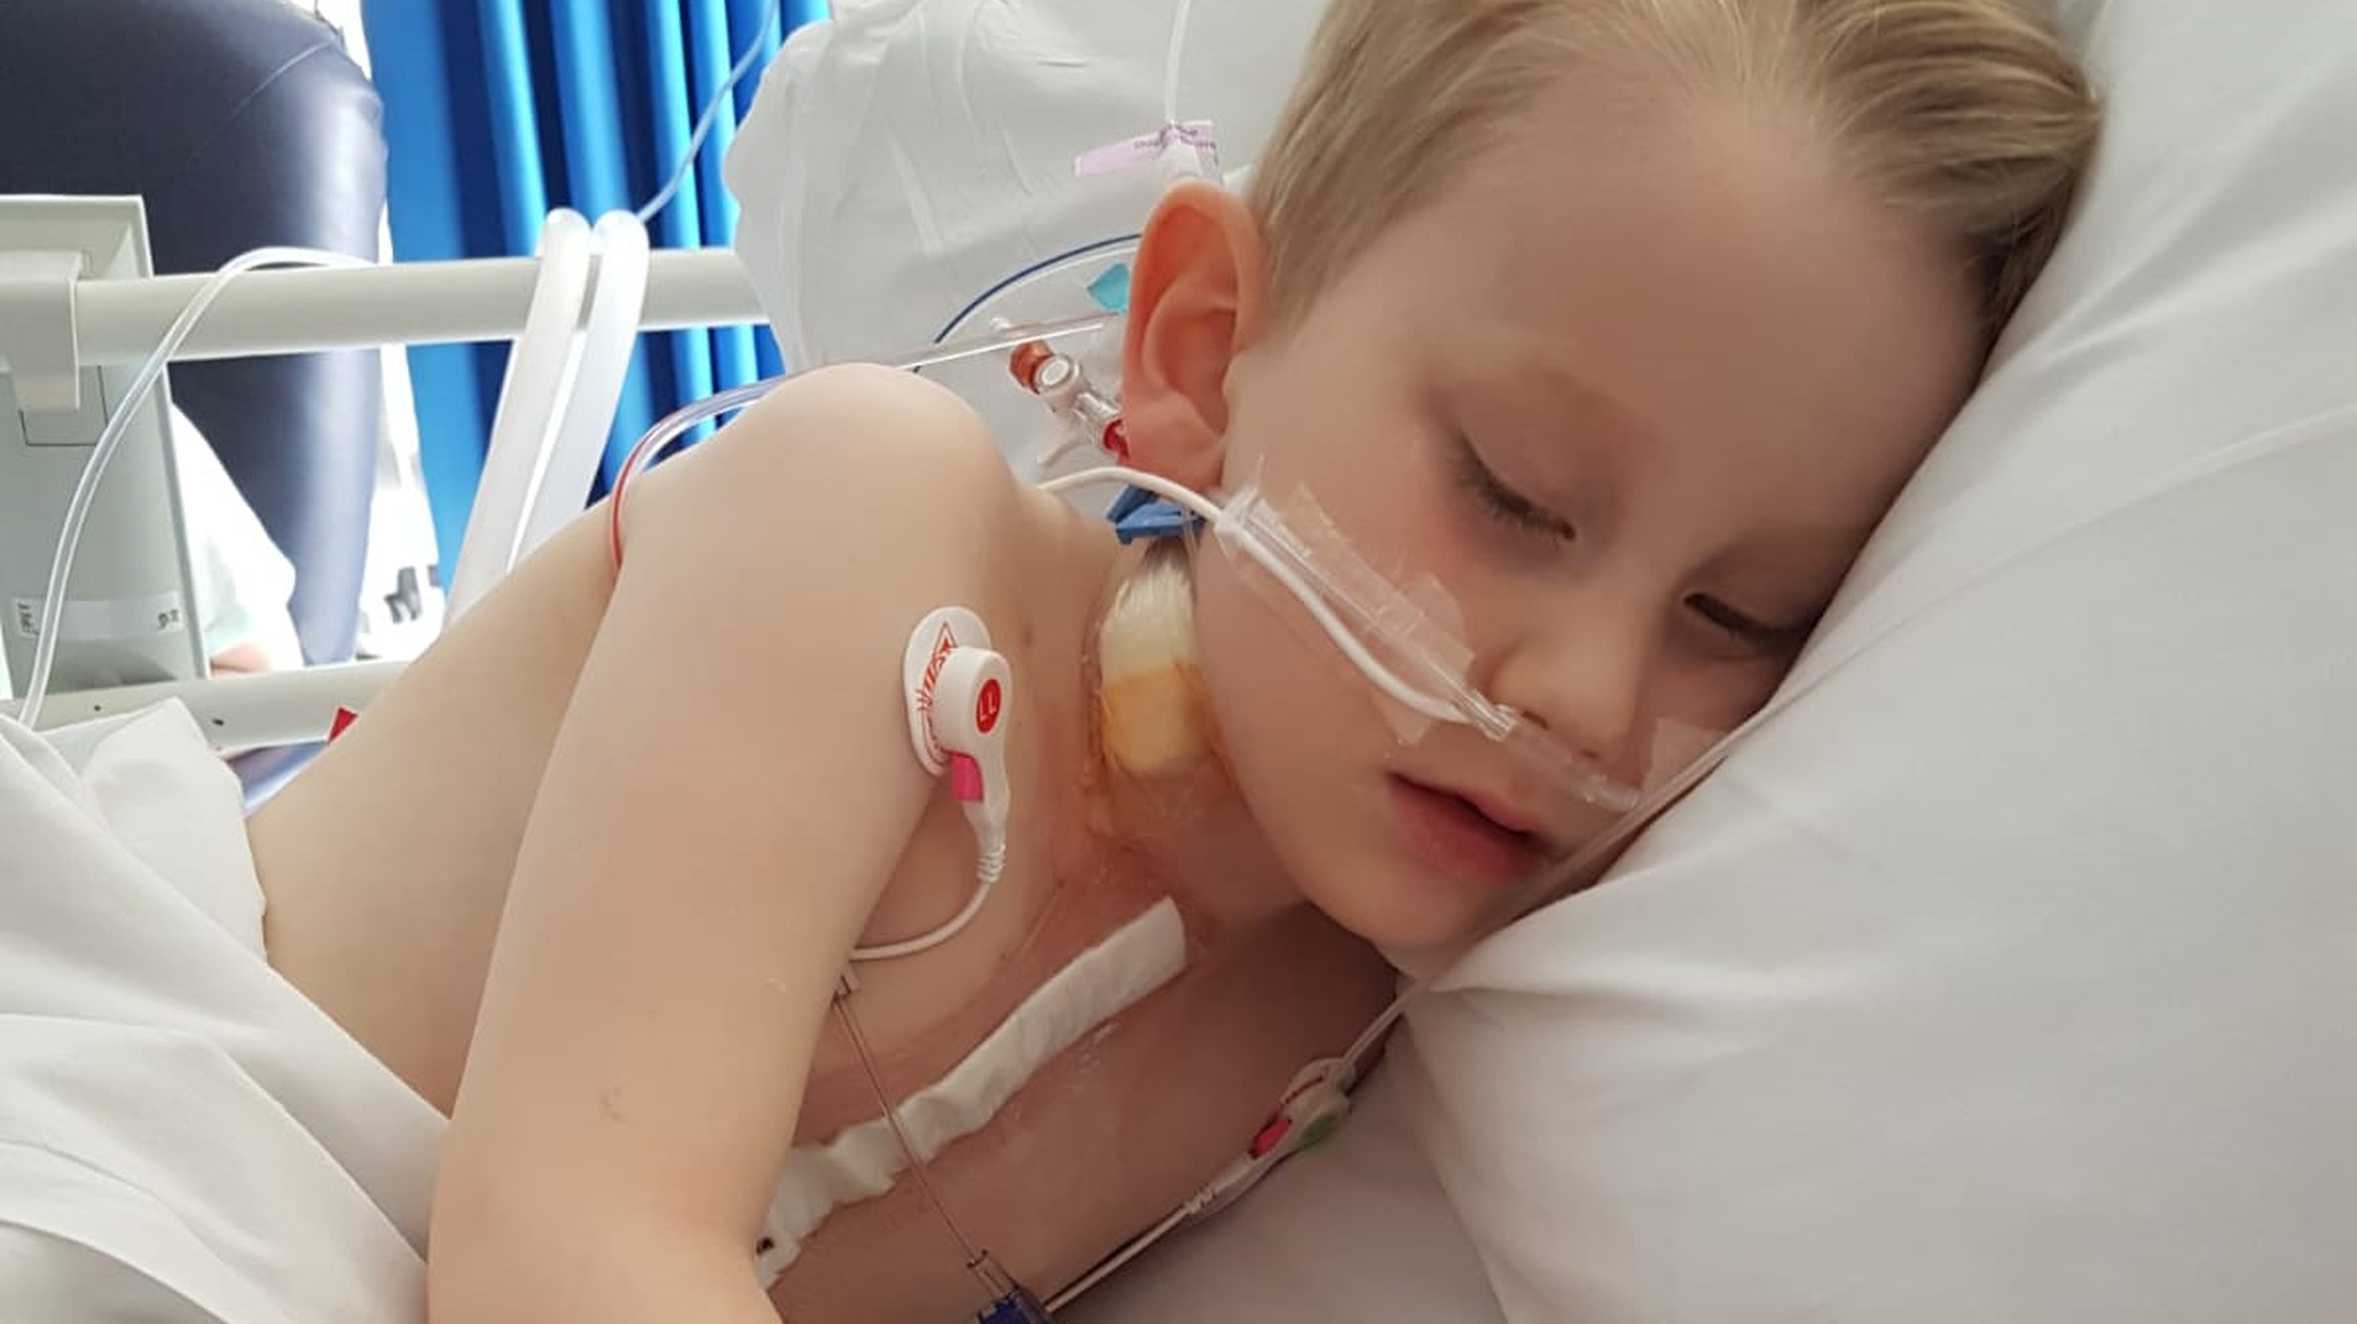 Louis asleep in his hospital bed, connected to breathing apparatus